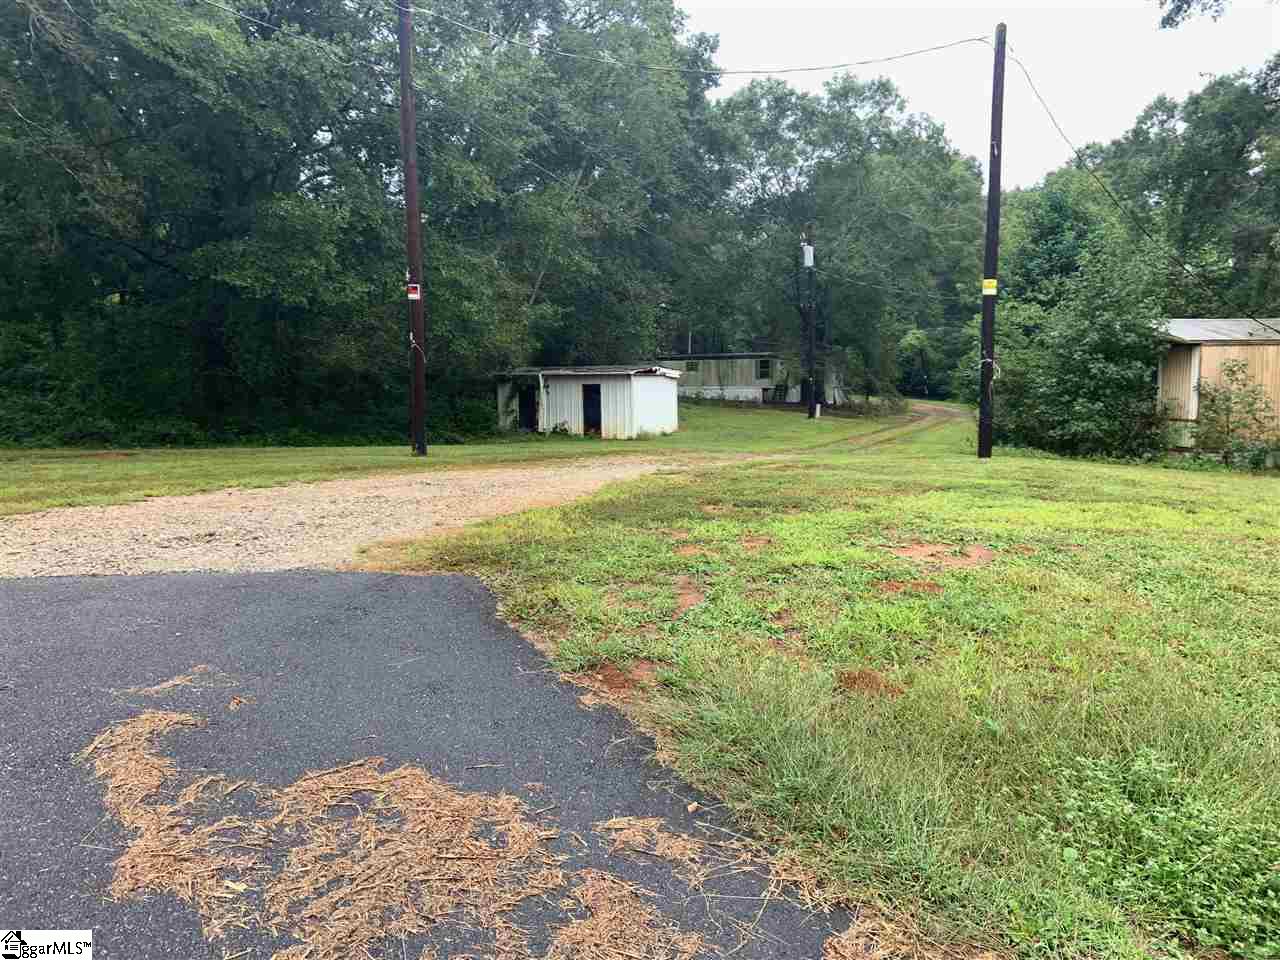 Call today and check out this property located in West Pelzer. The property was previously used for a Mobile Home Park. One tenant is still occupying the property. 3 water taps are located on the property. TMS # 2430504008, 2430408001, 2430408010